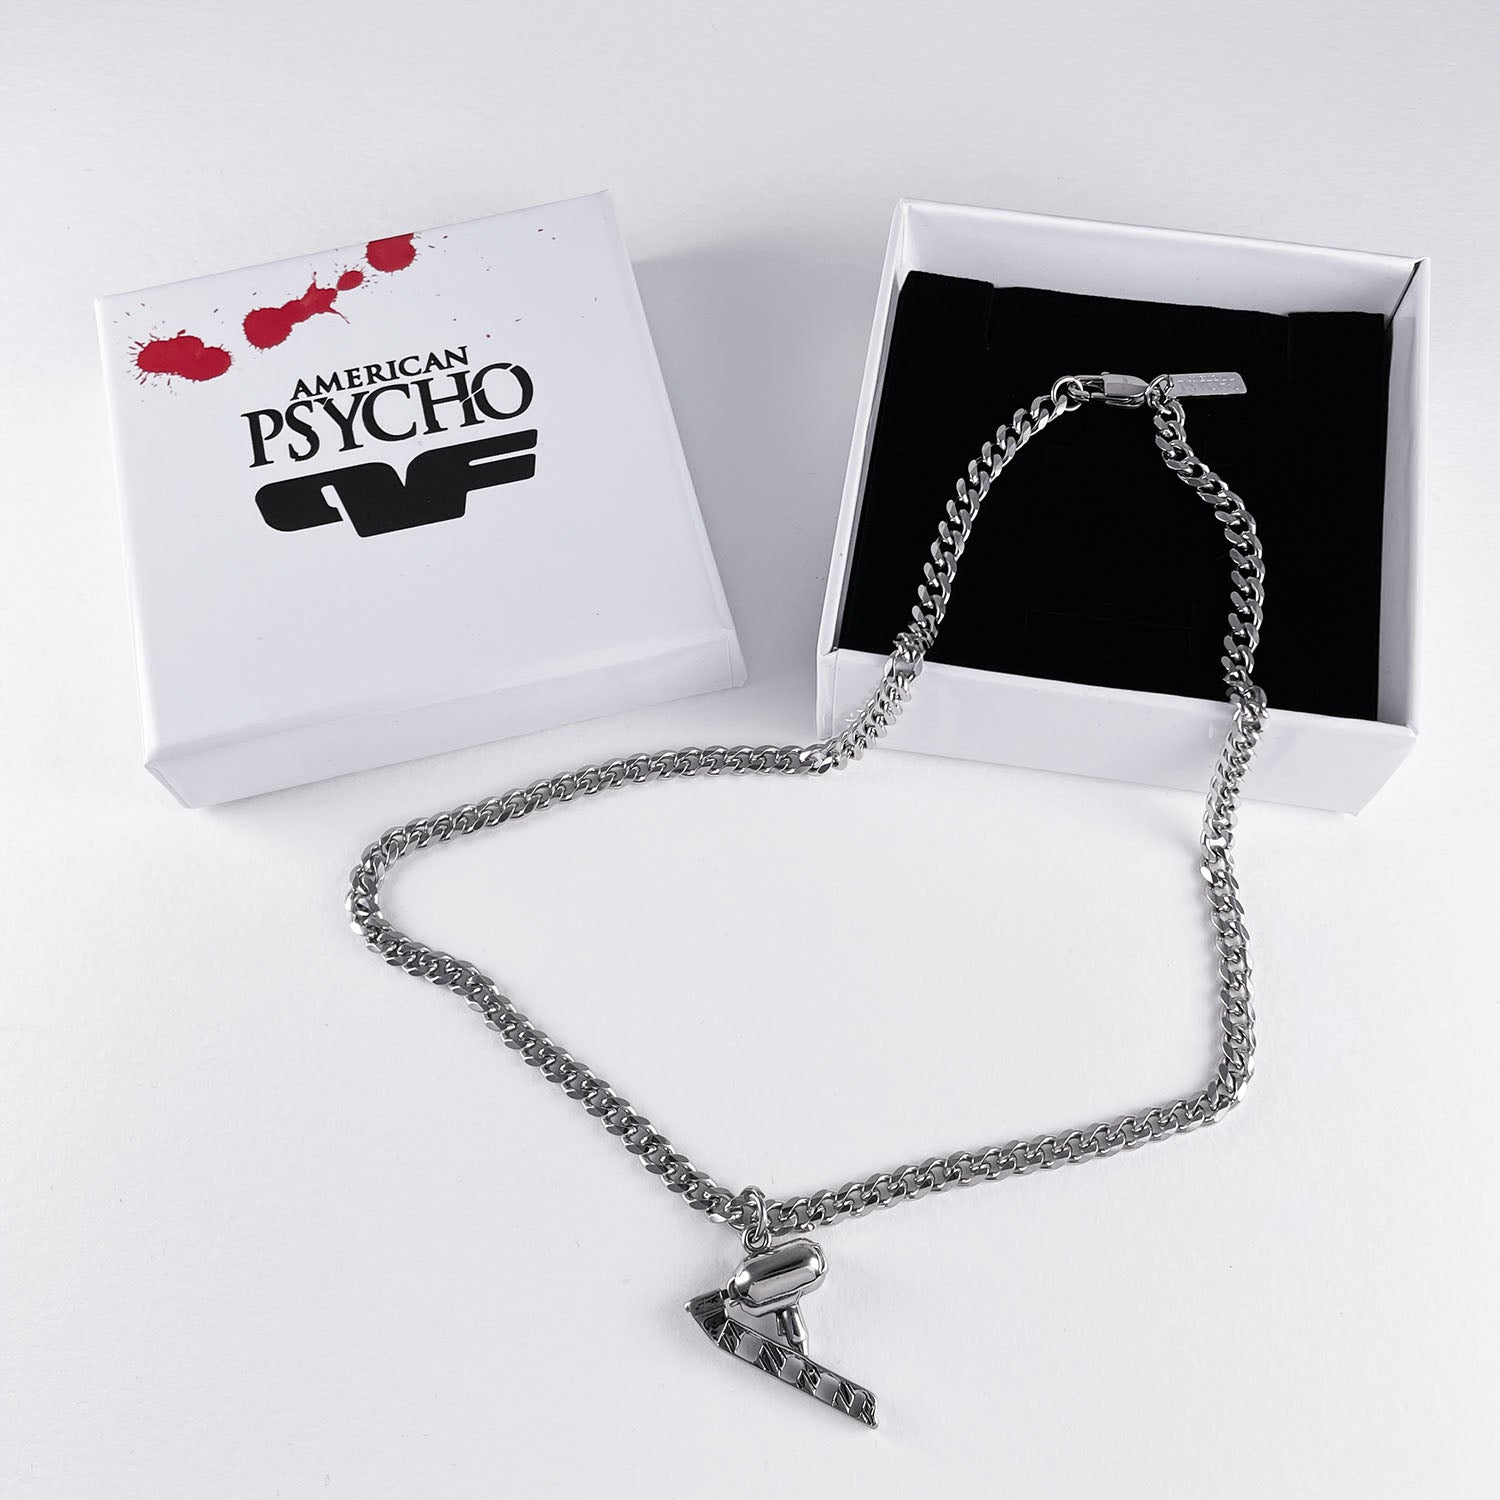 Personal Fears X American Psycho  Nail Gun Necklace in Stainless Steel on box